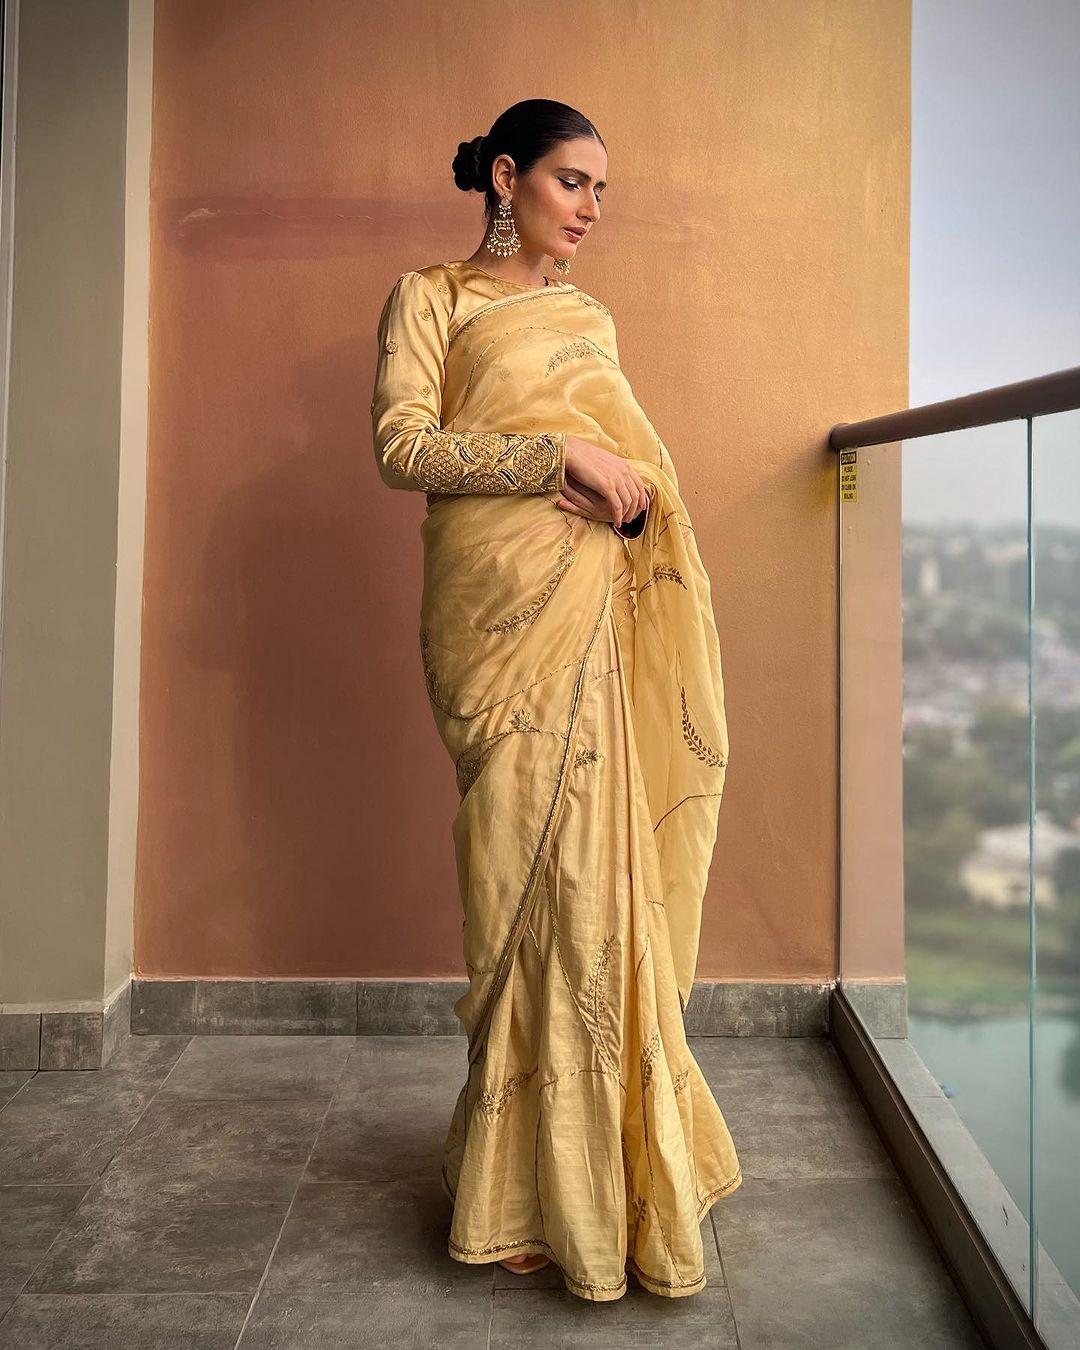 Fatima Sana Shaikh looks absolutely stunning in a golden saree that's just perfect for Lohri celebrations. The full sleeves and her hair styled in a bun add an extra level of style to the saree. The long jhumkas she's rocking perfectly match the richness of the golden saree